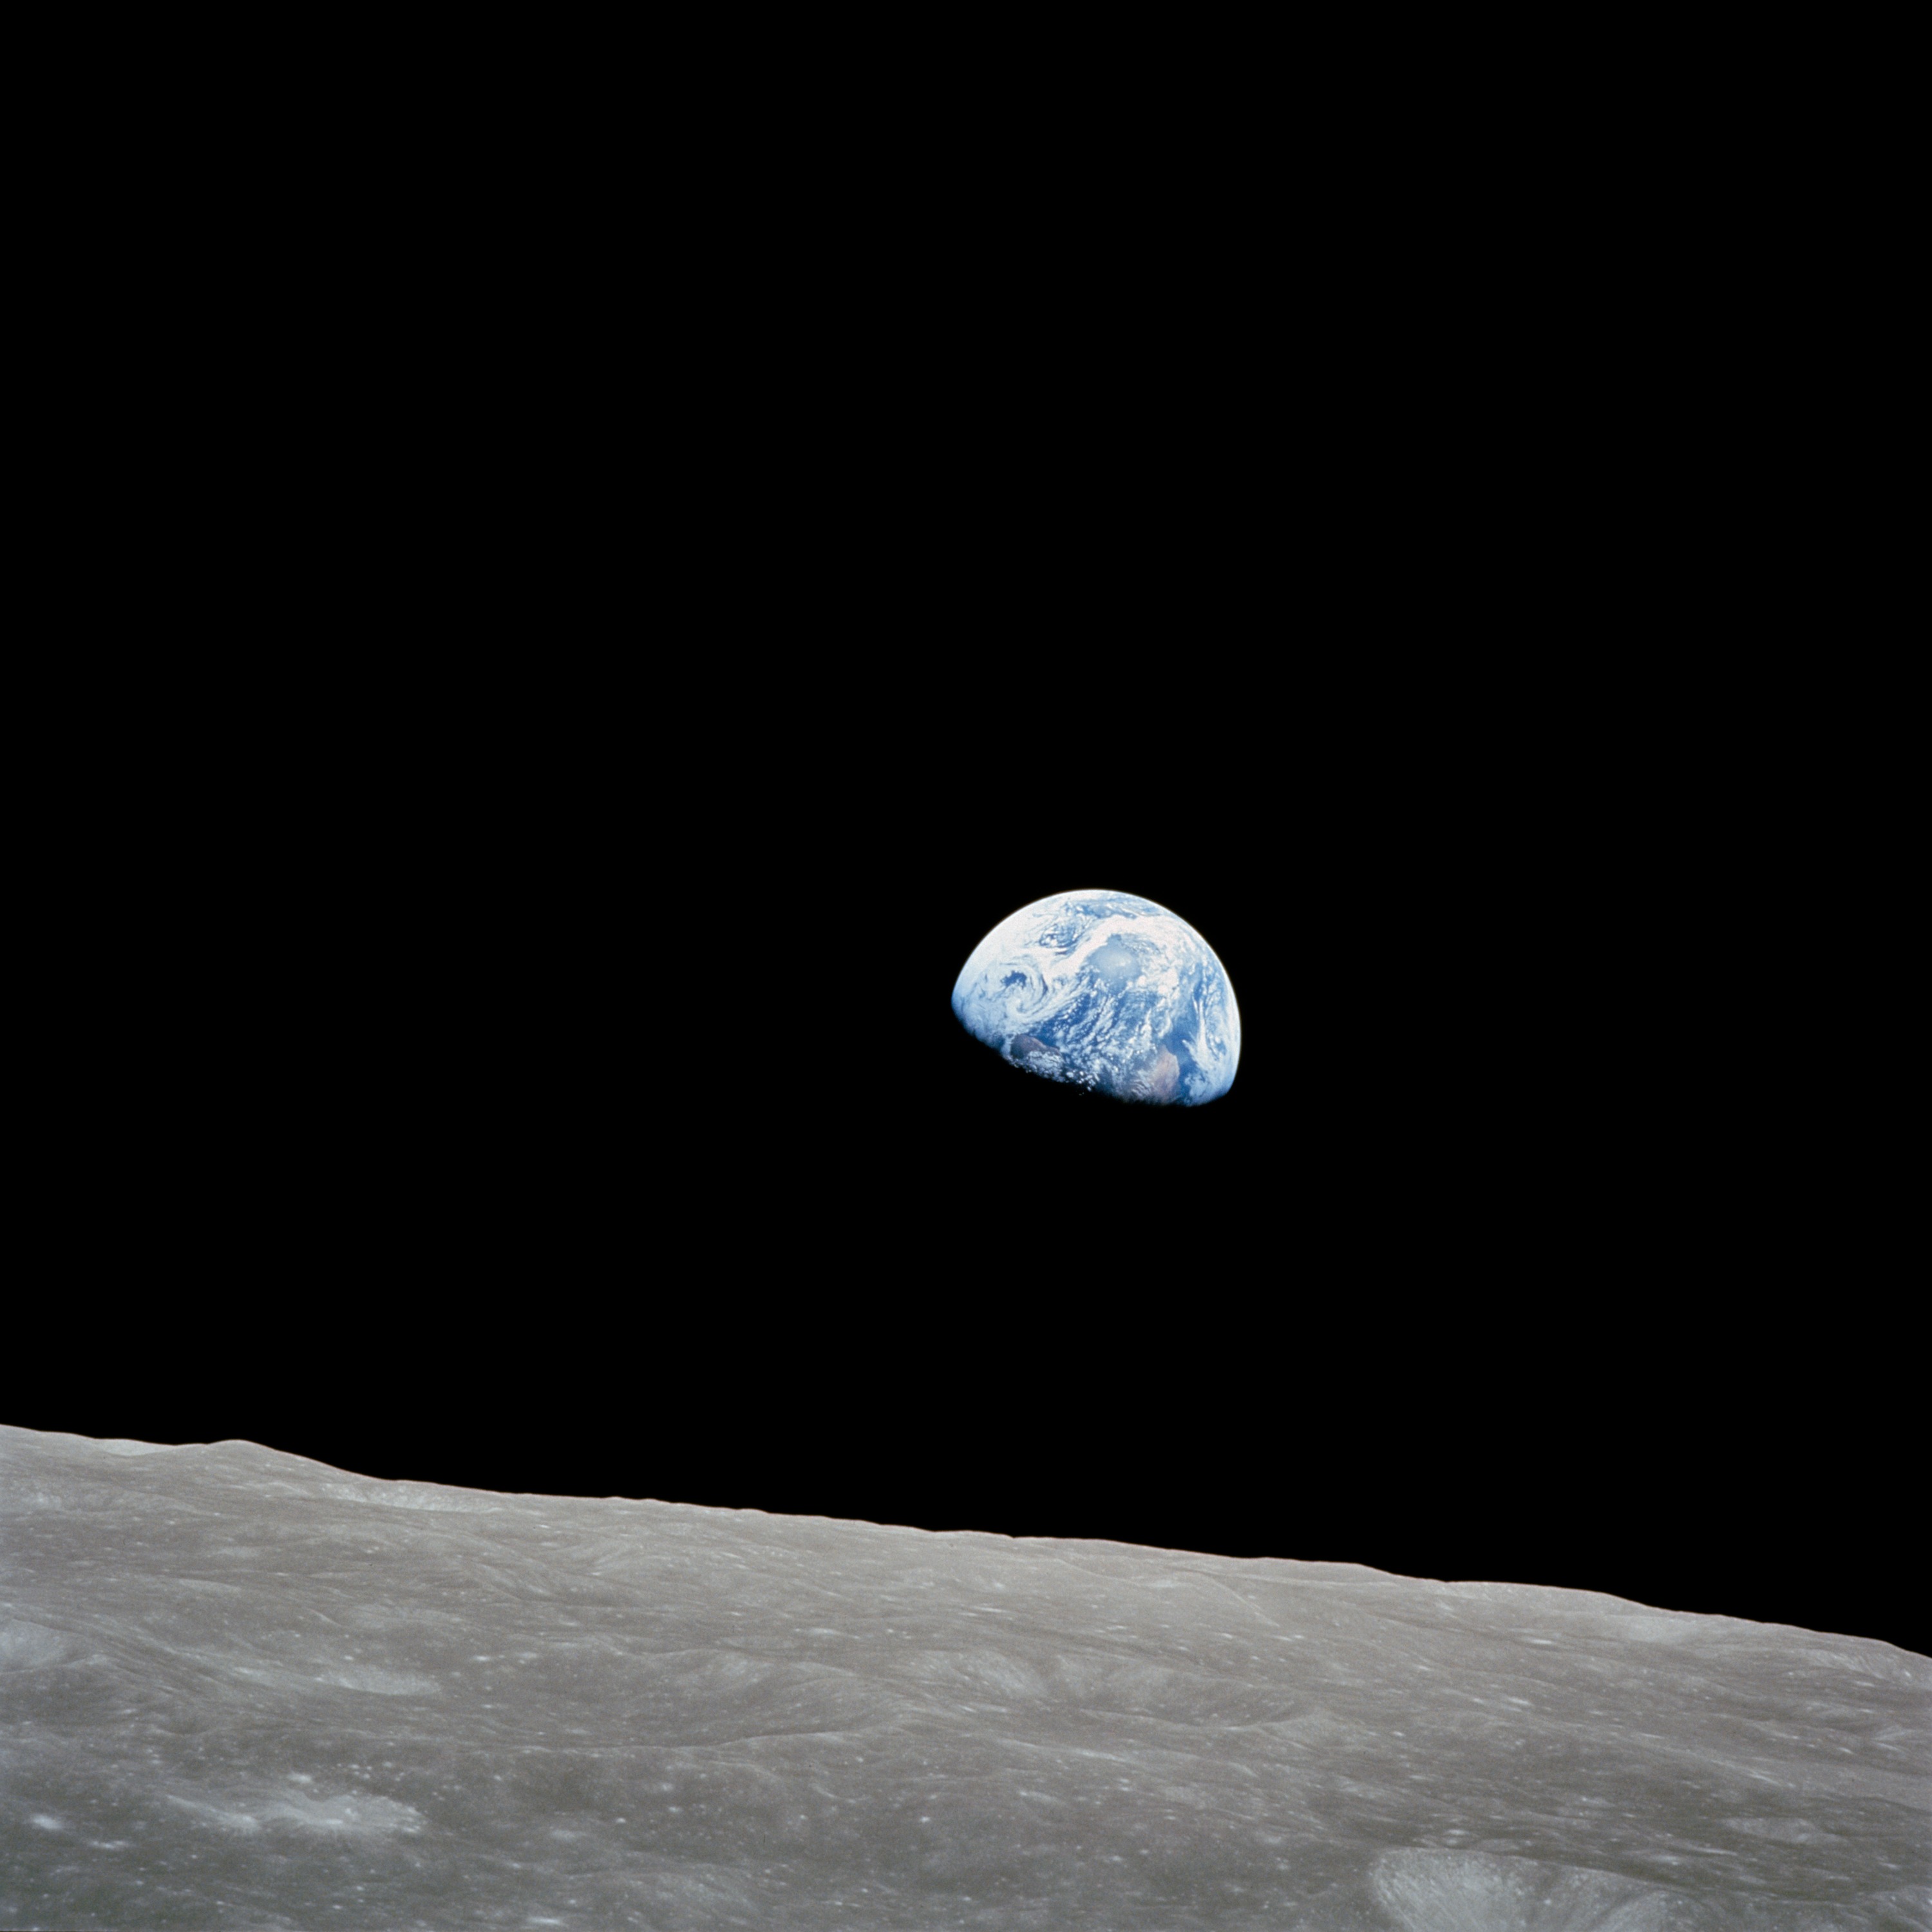 “Earthrise” by NASA Astronaut Bill Anders